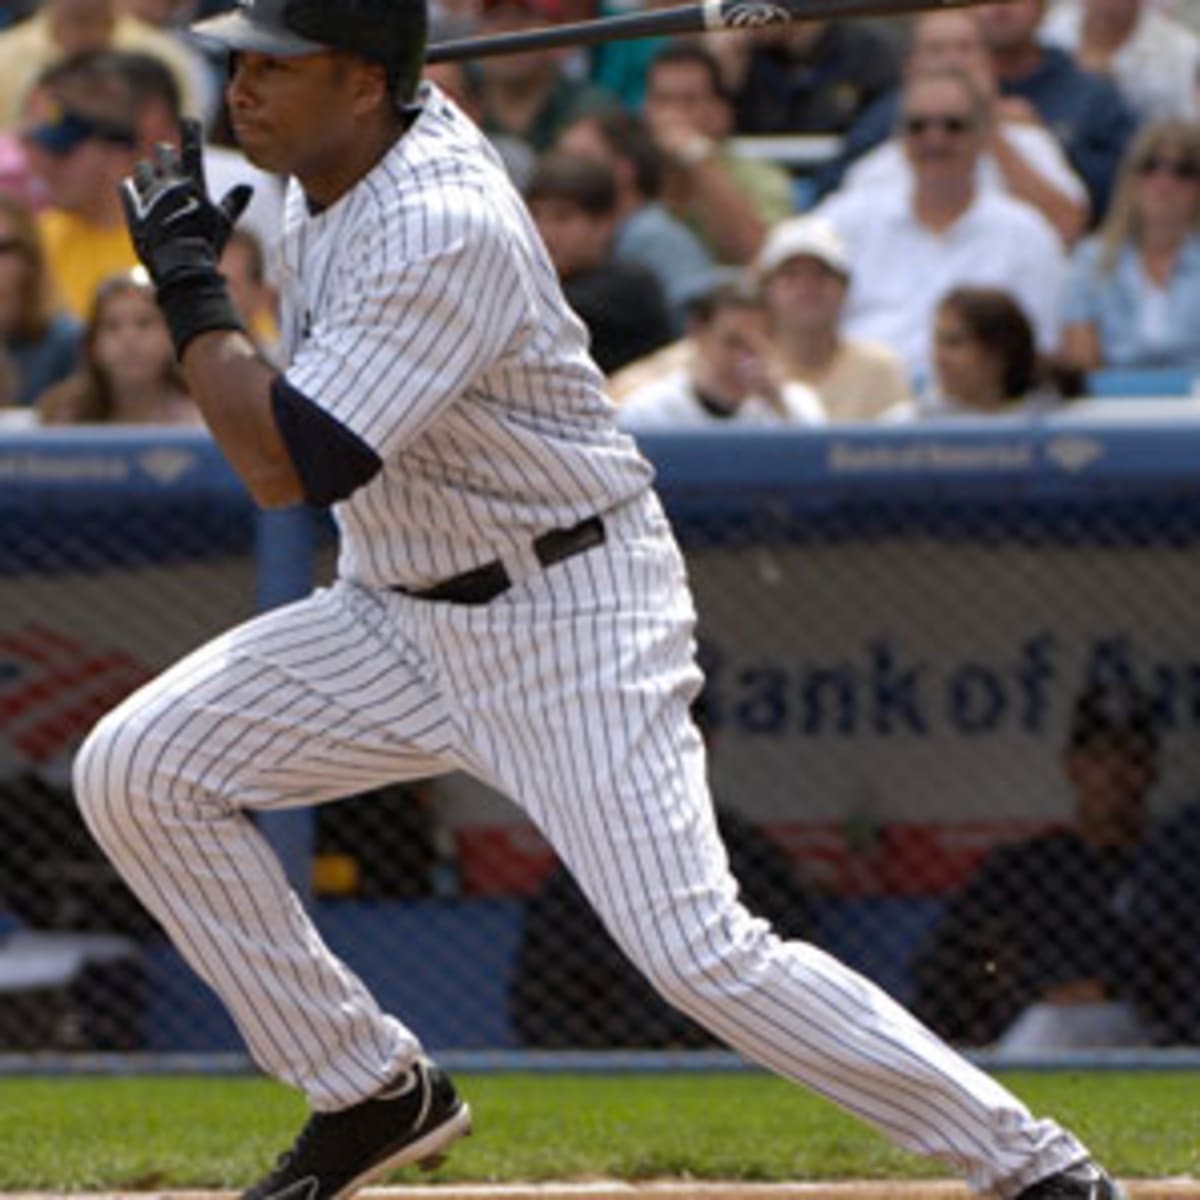 Yankees legend Bernie Williams shares experience of caretaking for